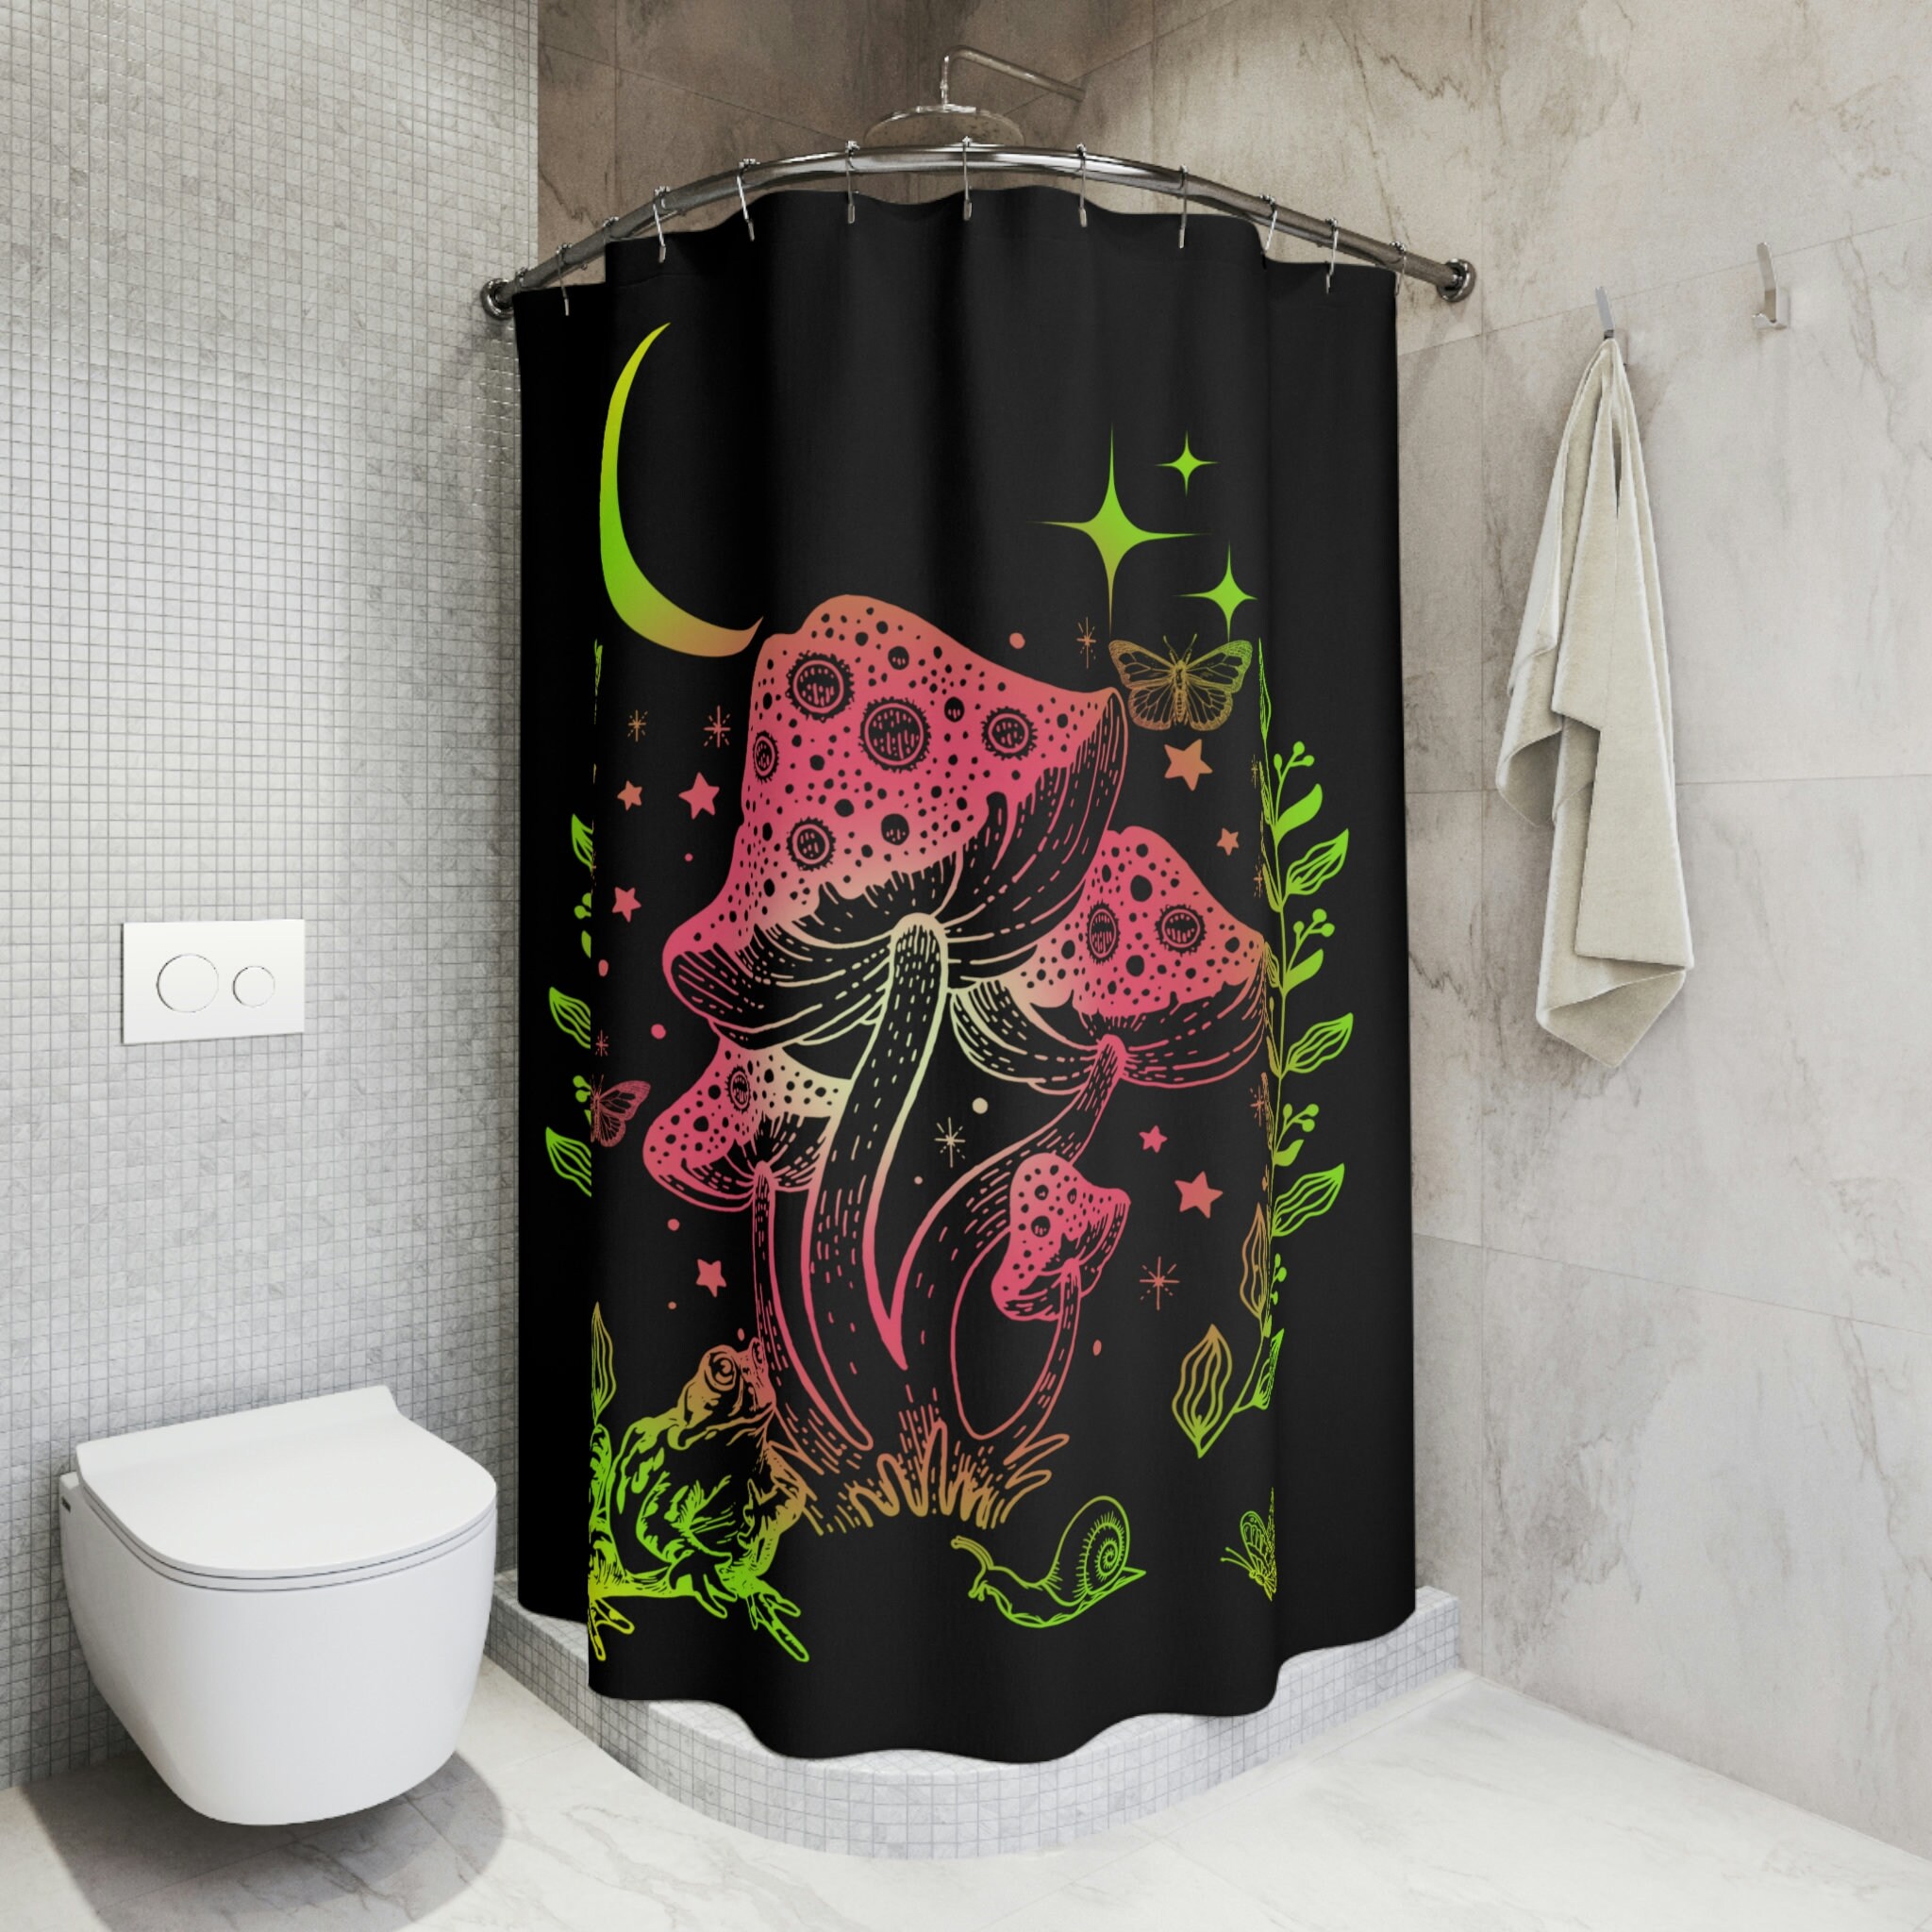 Frog and Mushroom Shower Curtain With Quarter Moon and Stars in Pink,  Green, and Yellow Gradient Handmade Unique Bathroom Decor 